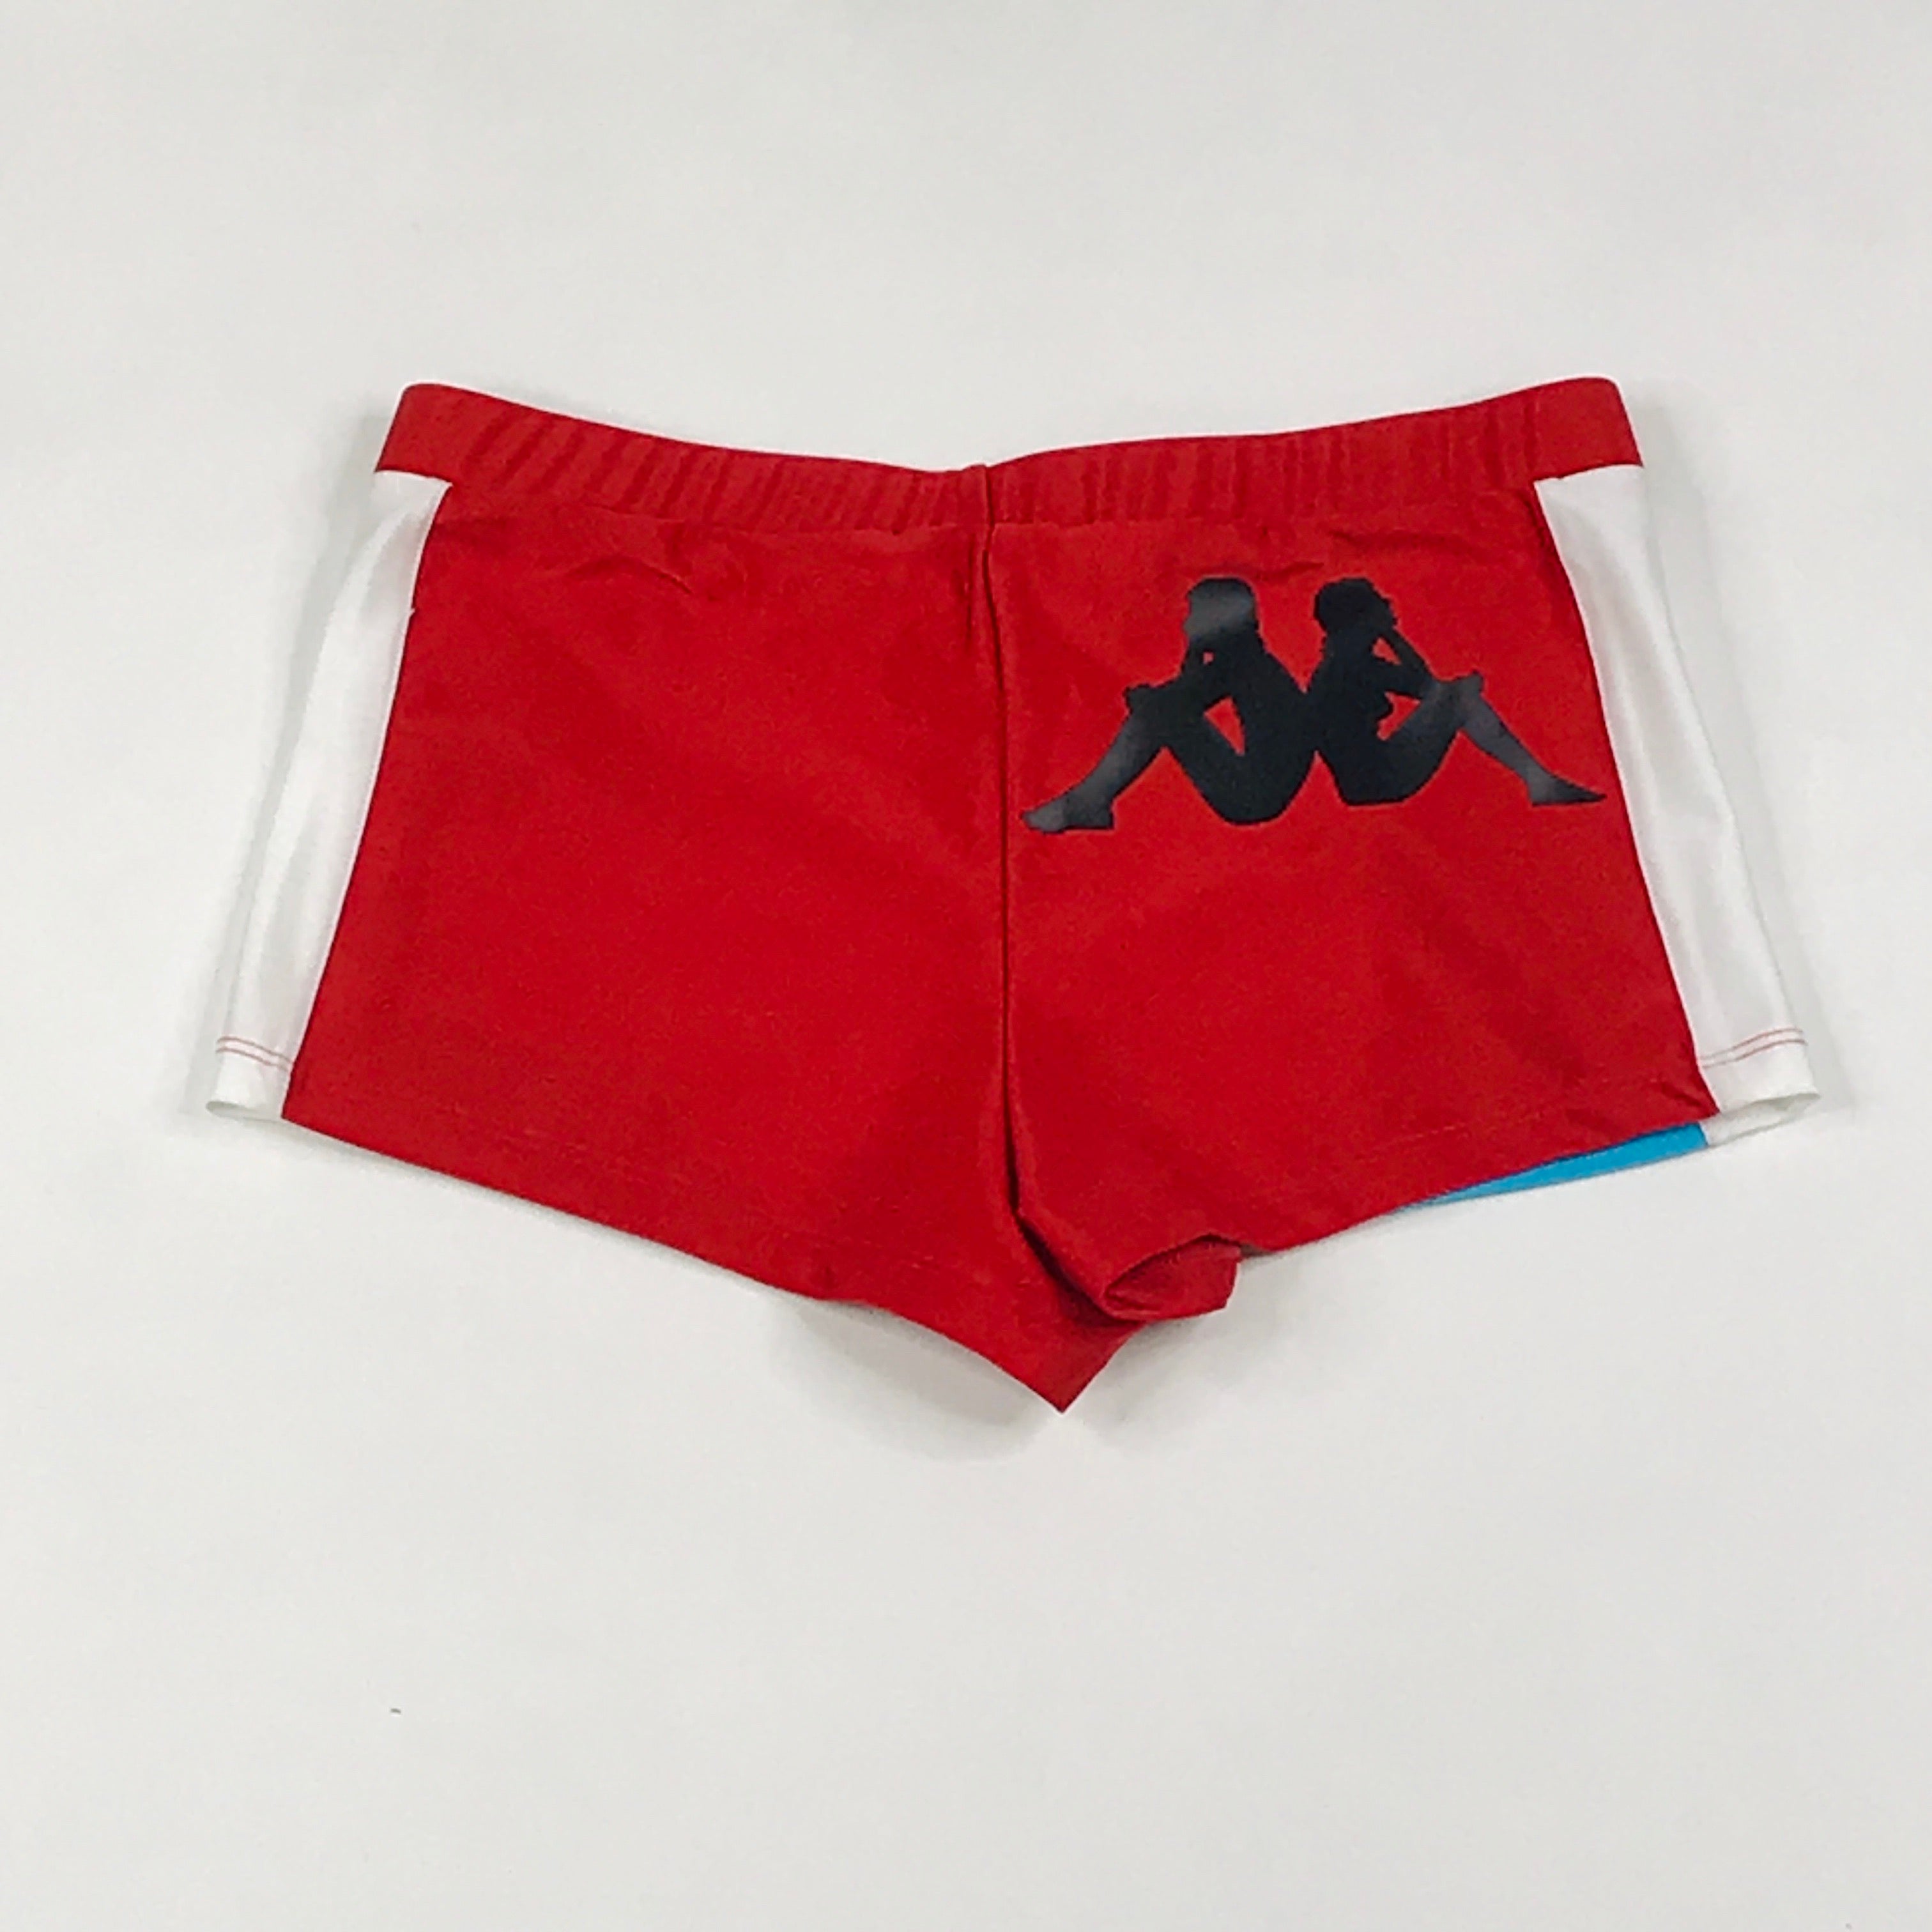 Kappa Authentic Race Catim athletic short set in red-white-turquoise